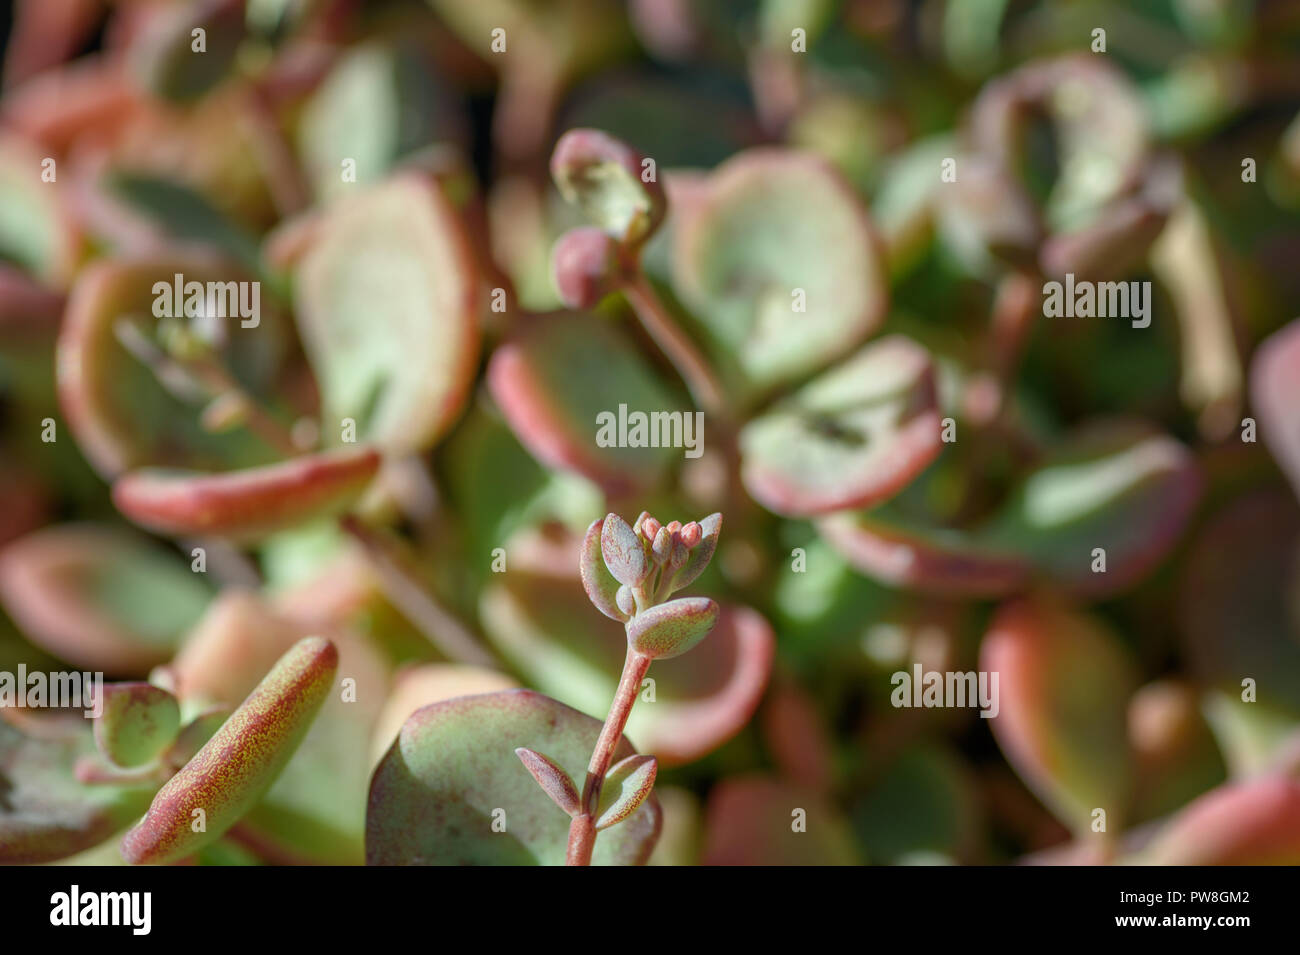 Emerging flower bud of a  Crassula 'red edge' succulent plant. Stock Photo